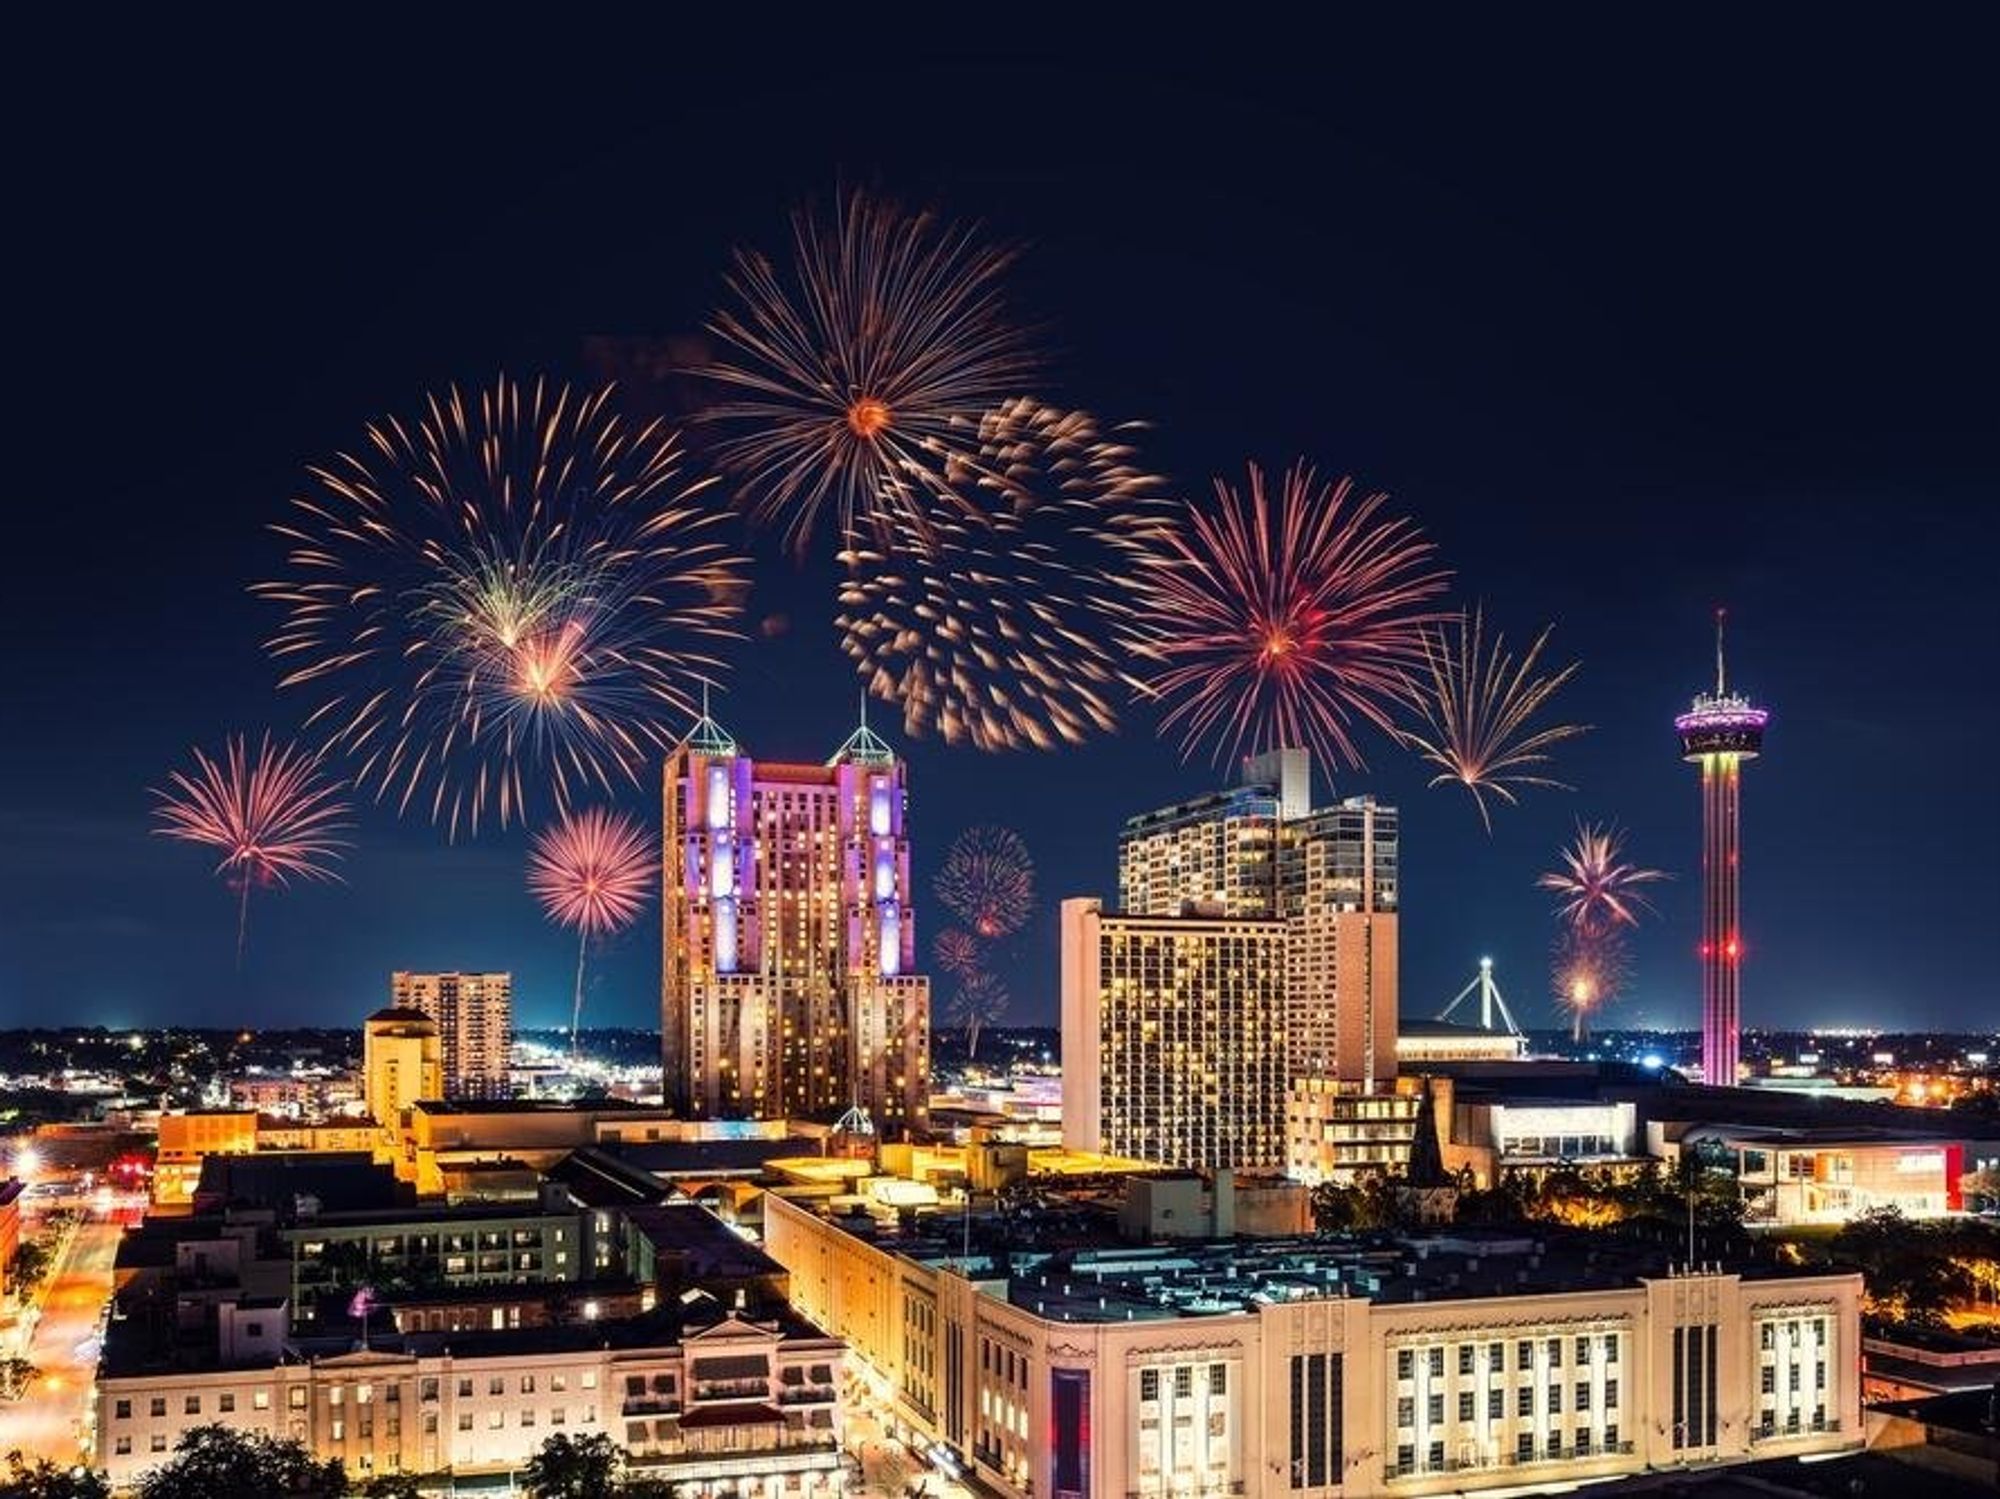 San Antonio is the 9th best U.S. city to celebrate Independence Day